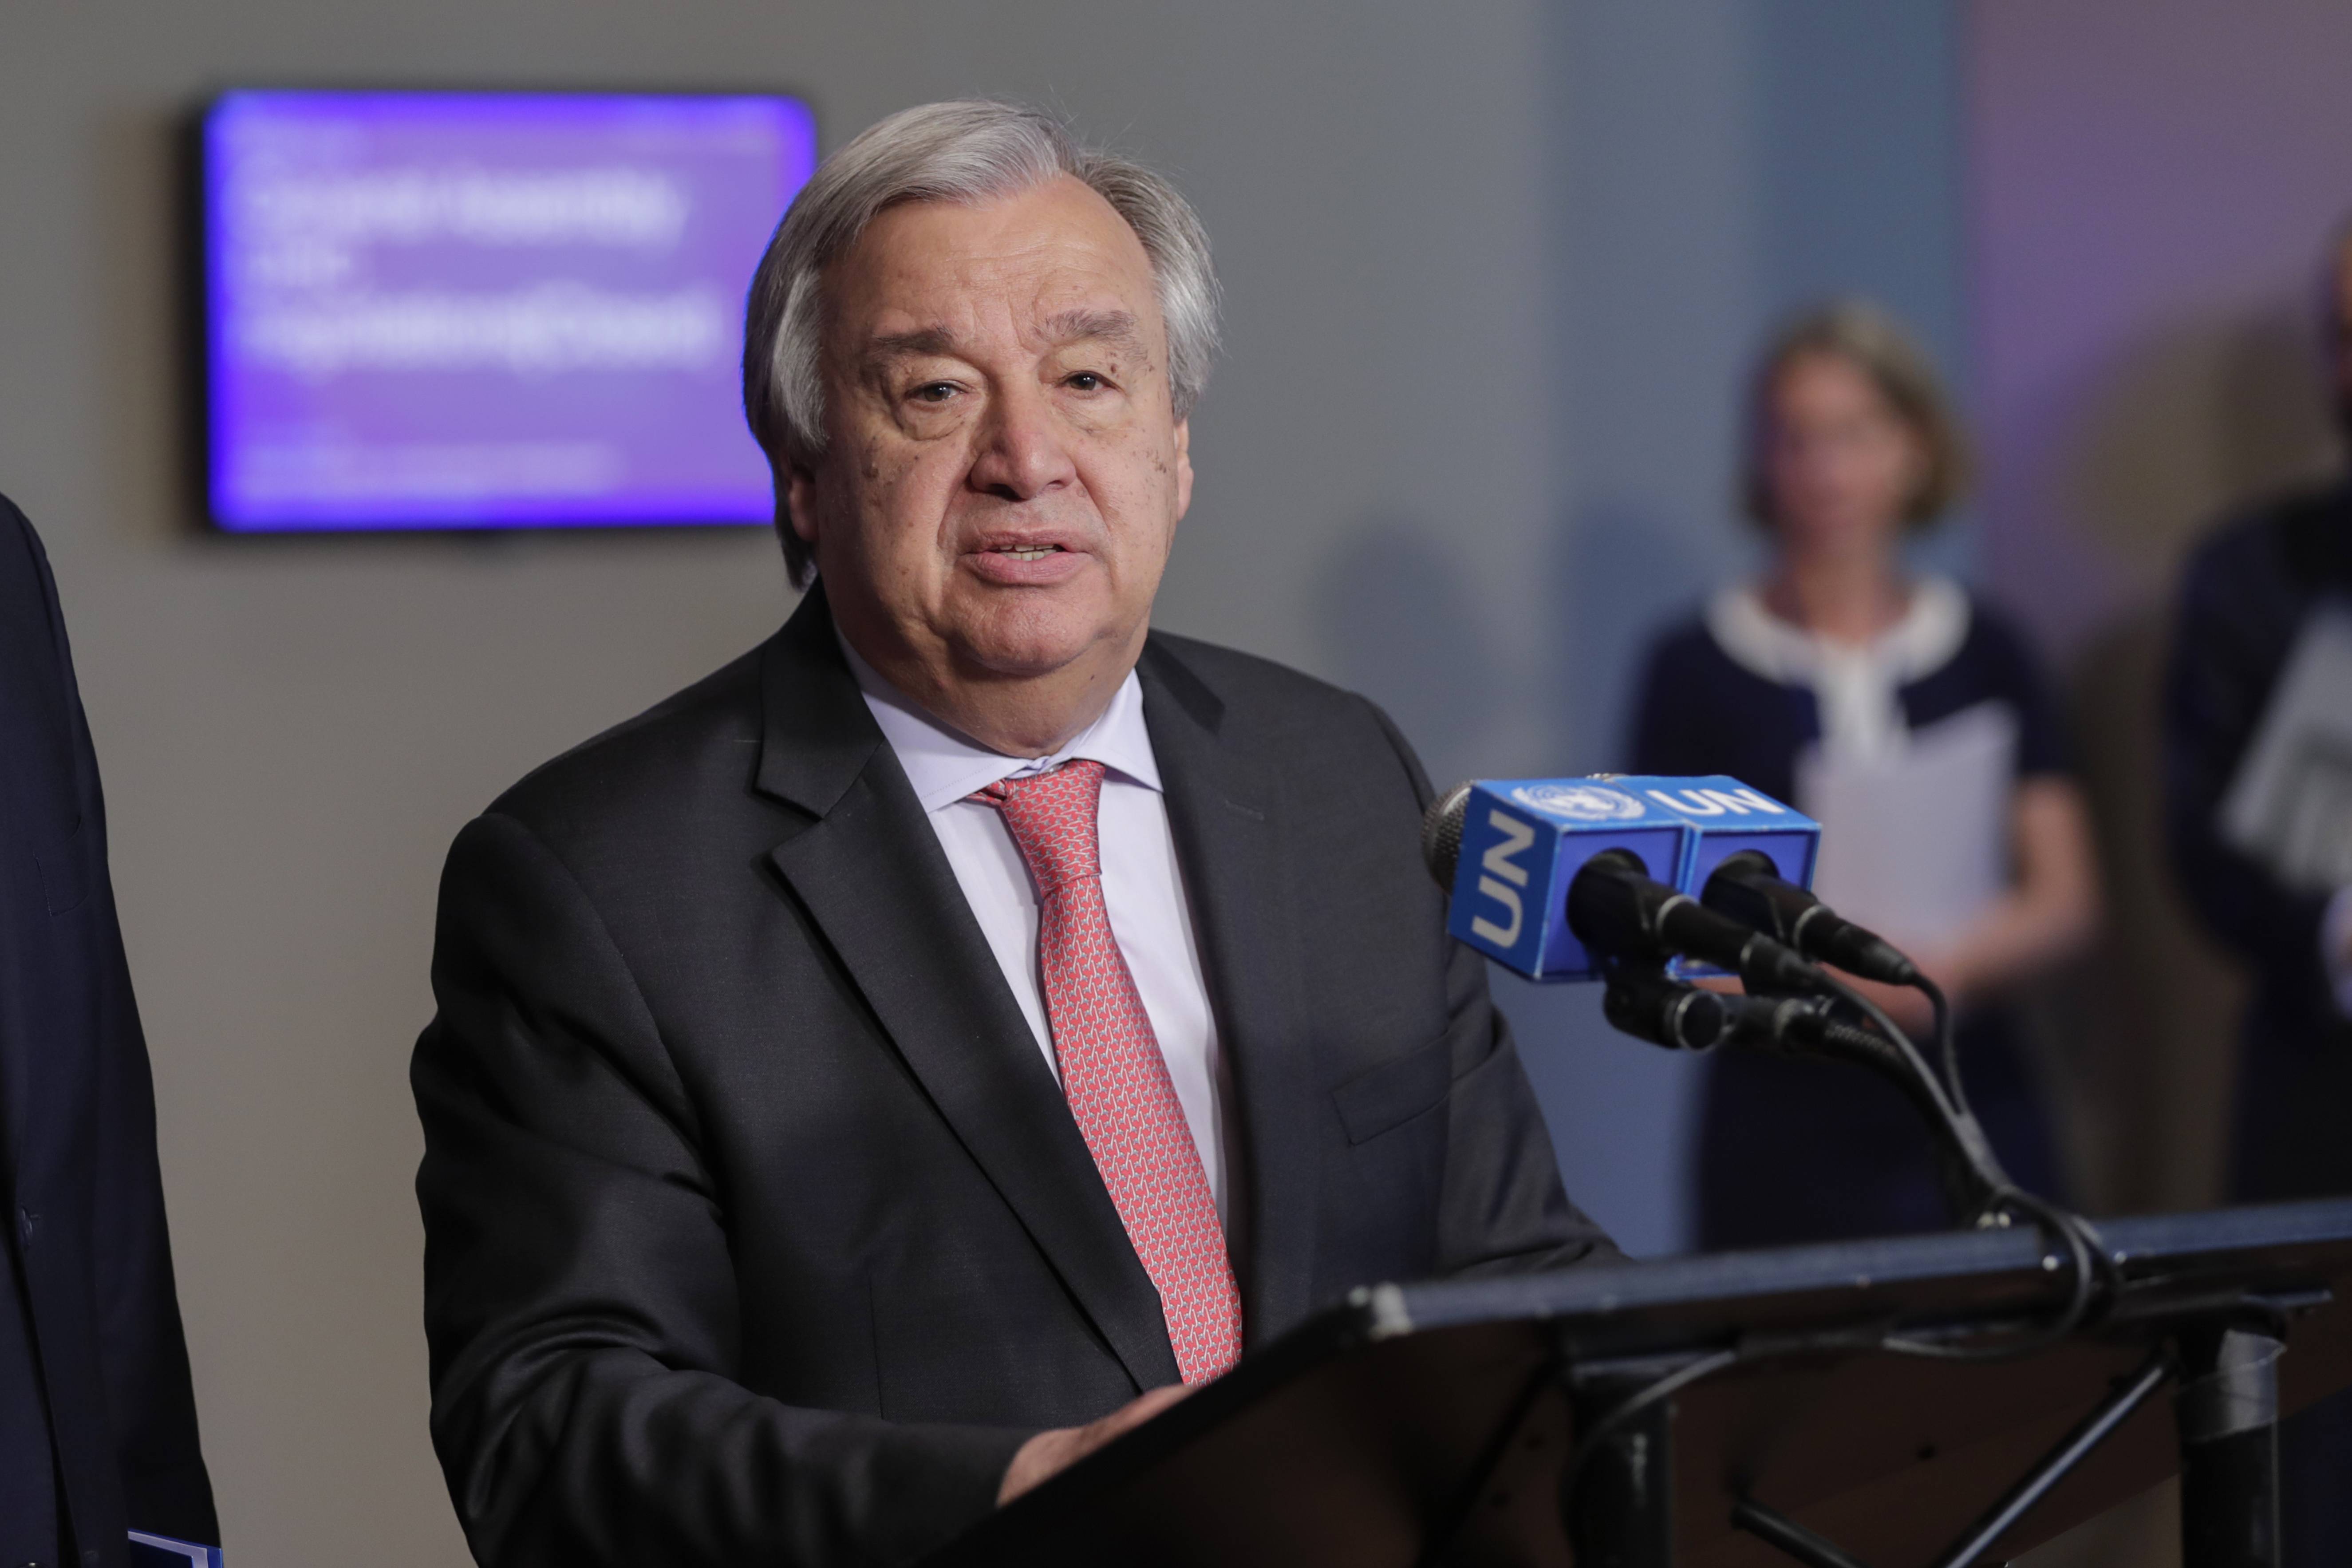 Portrait of Secretary-General Antonio Guterres at the United Nations in New York City, New York, June 18, 2019. (Photo by EuropaNewswire/Gado/Getty Images)